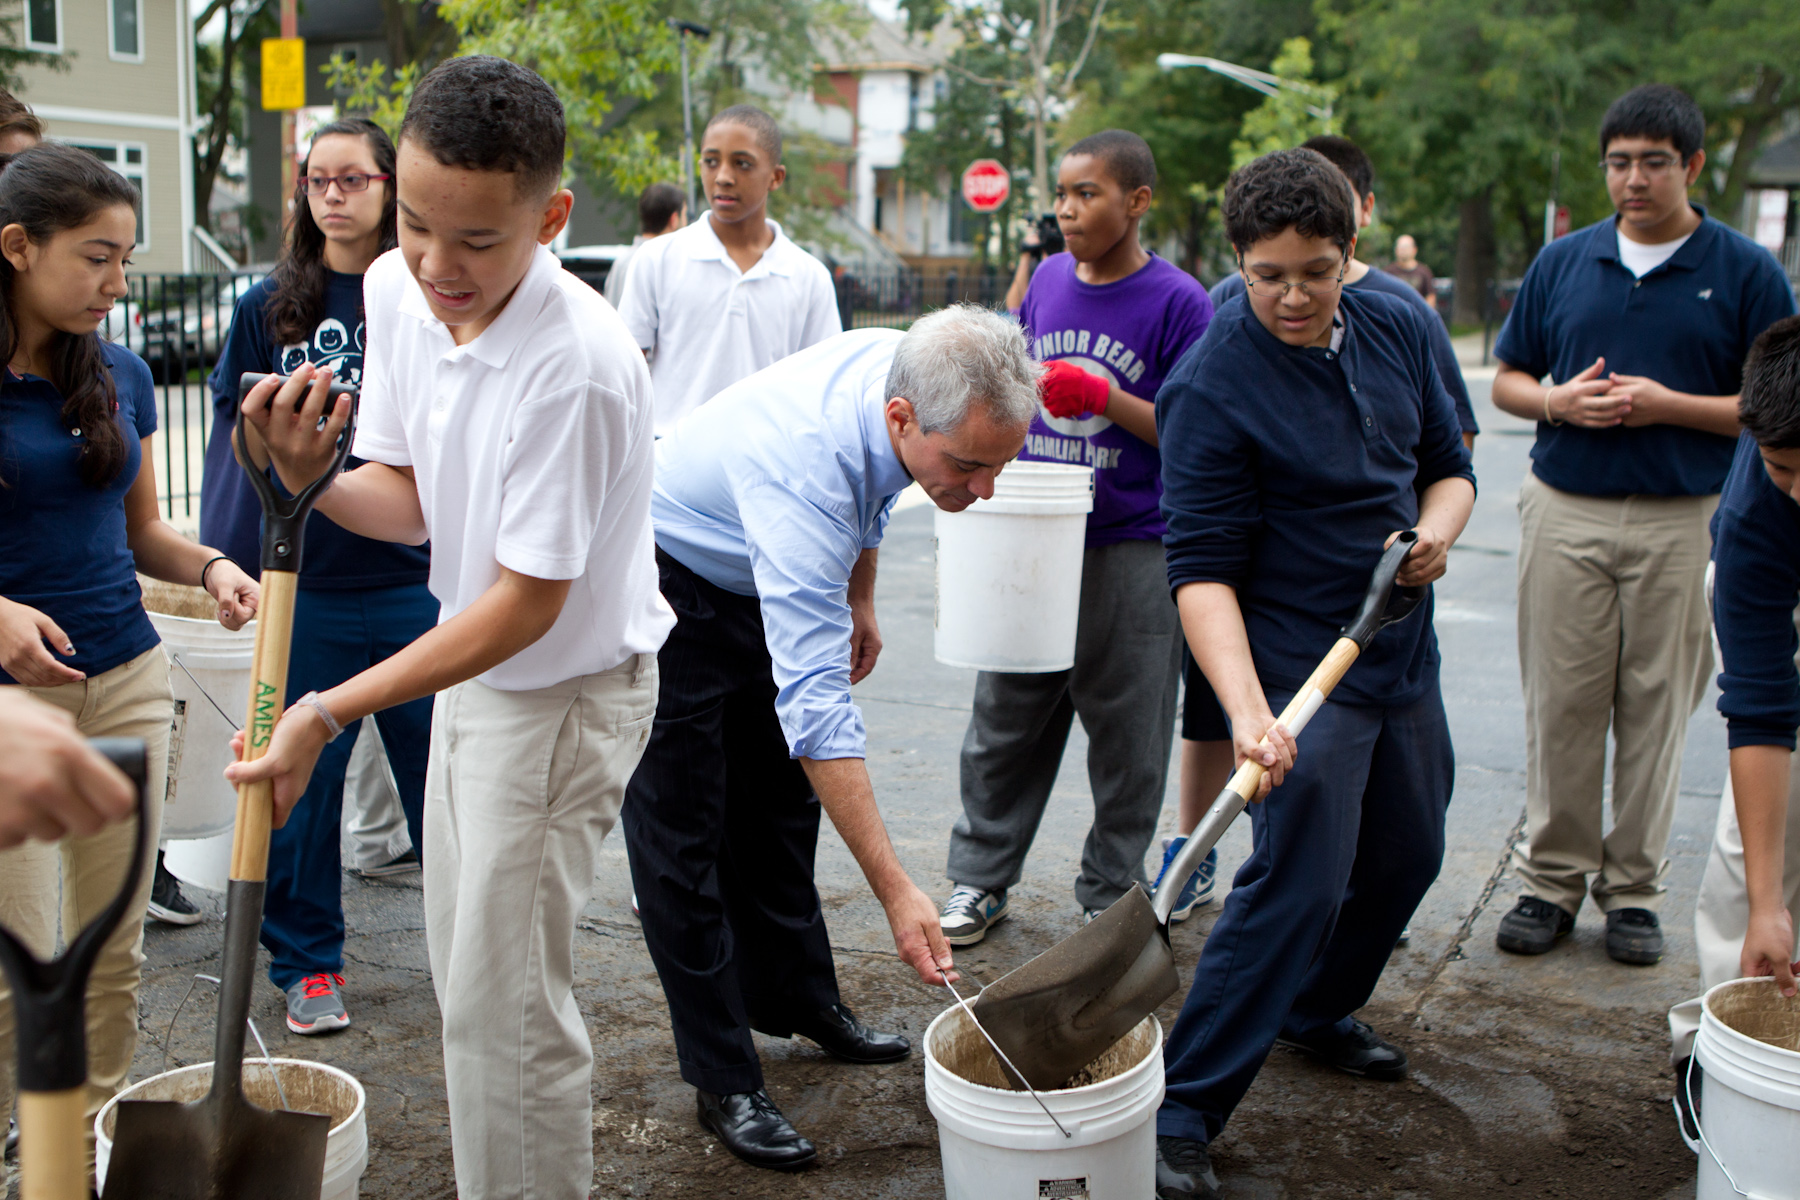 Mayor Emanuel joins students to help build the 75th new learning garden at Friedrich Ludwig Jahn Elementary School.